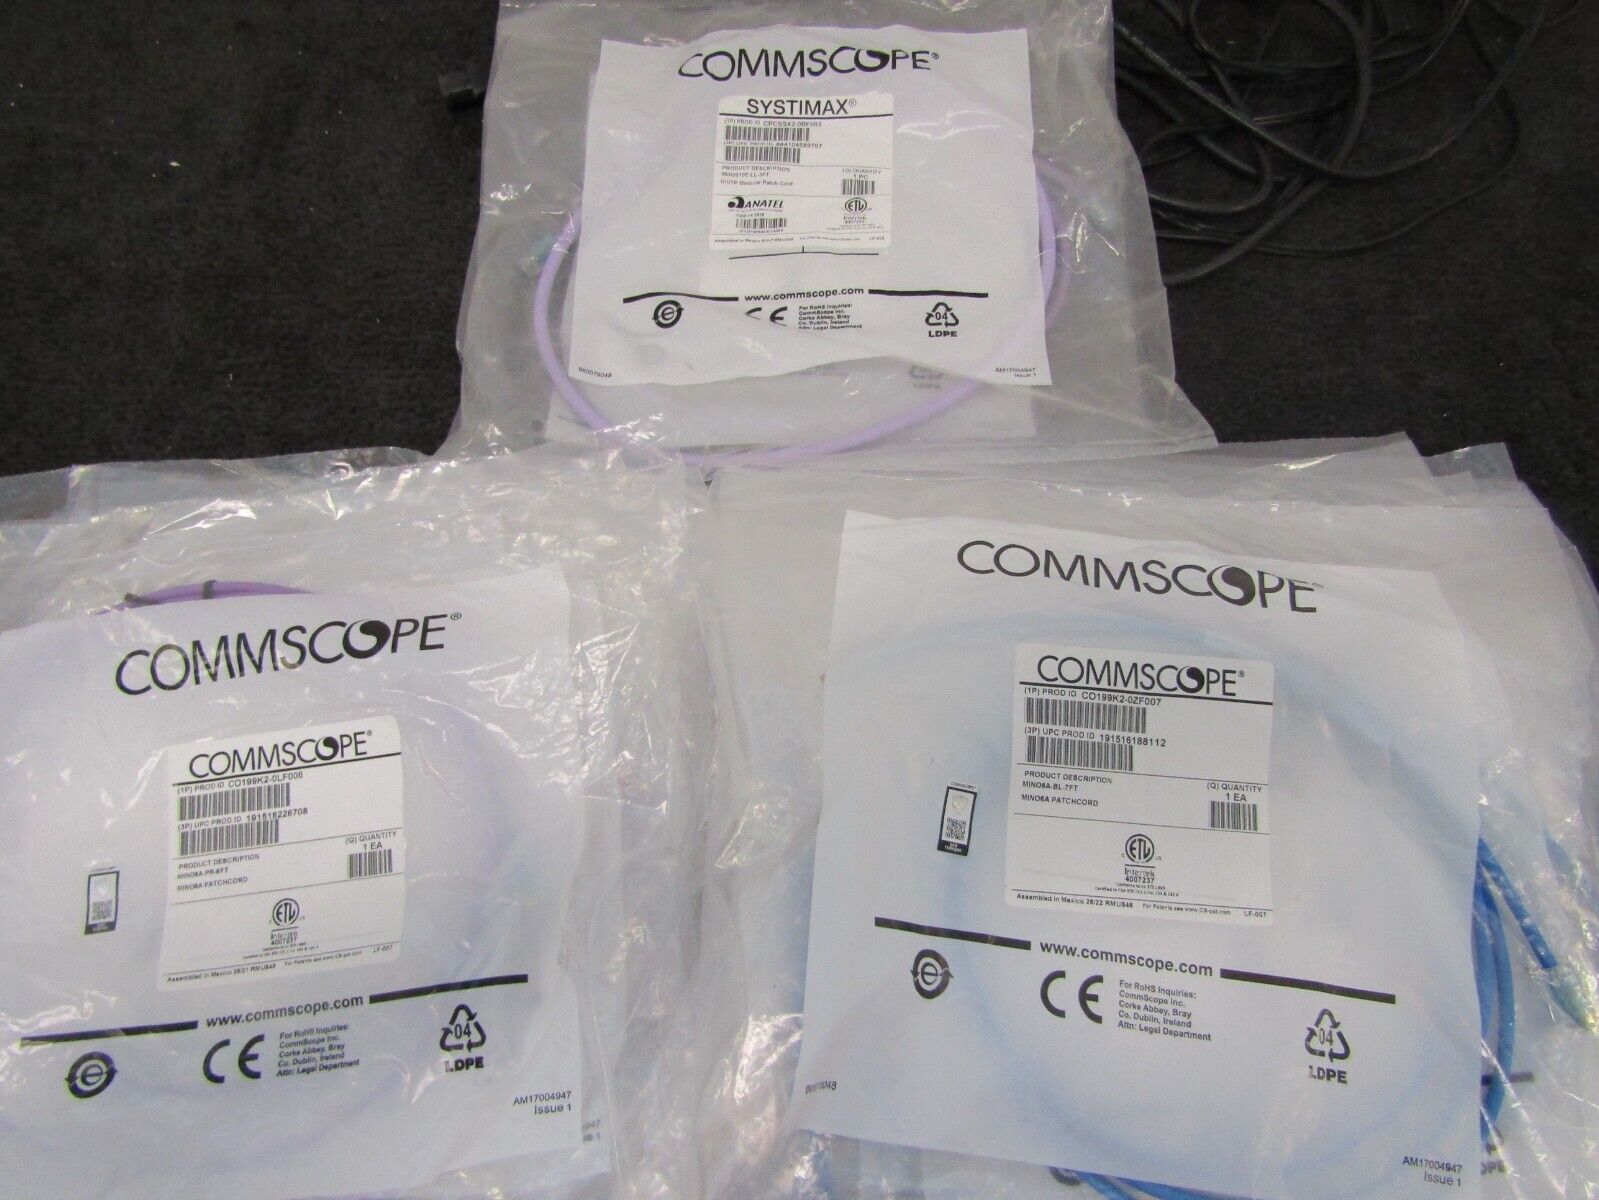 LOT of 23 COMMSCOPE Wires - READ DESCRIPTION - SEALED